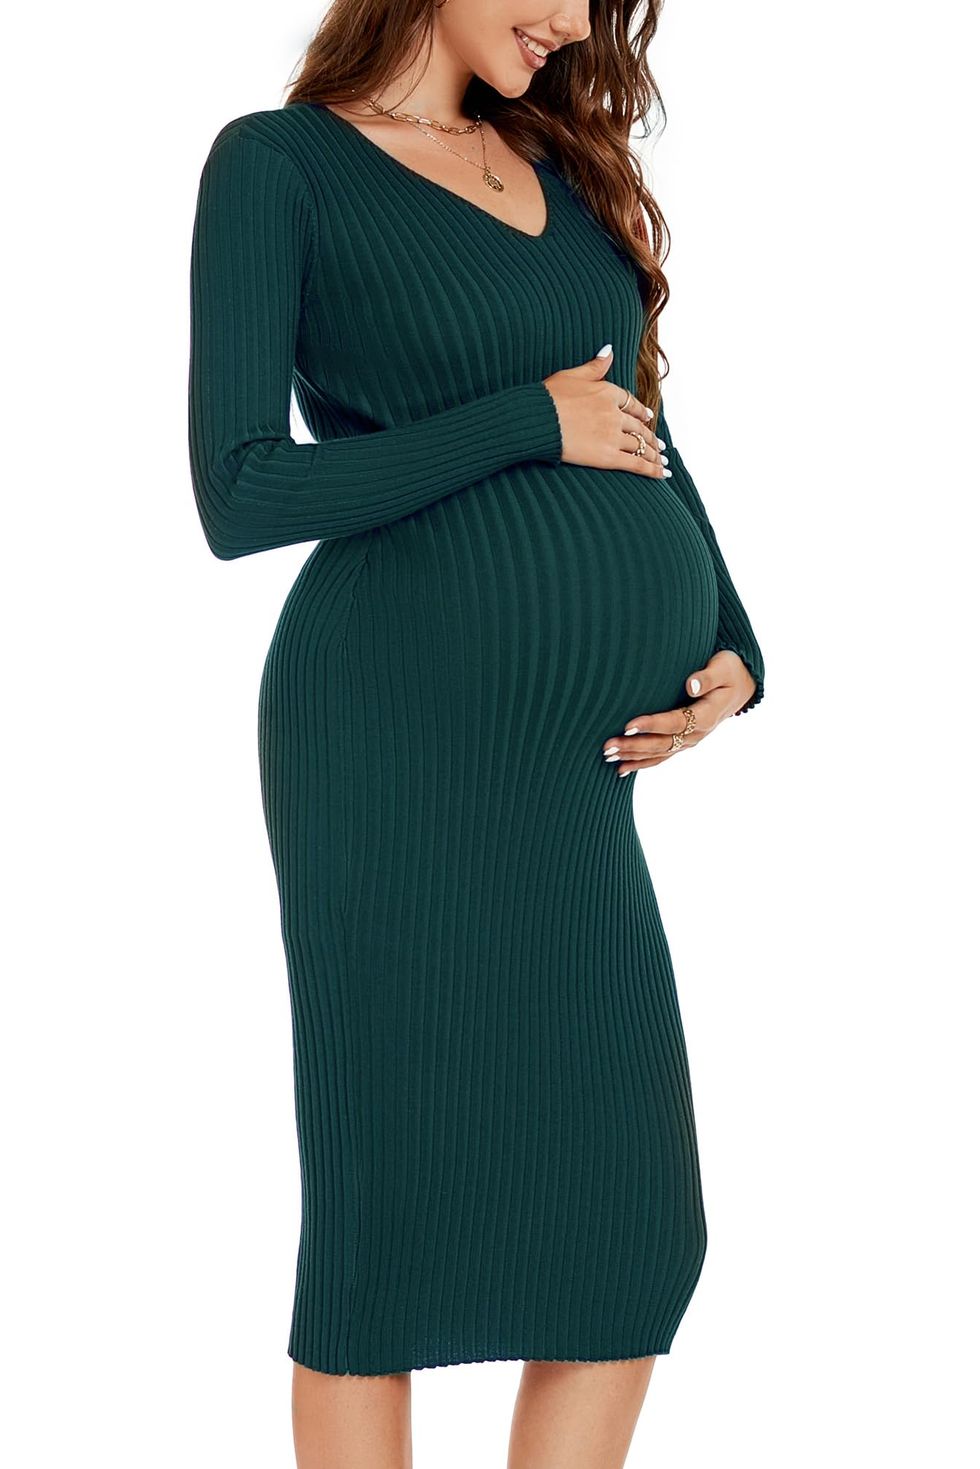 The 20 Best Maternity Dresses for Fall and Winter 2022